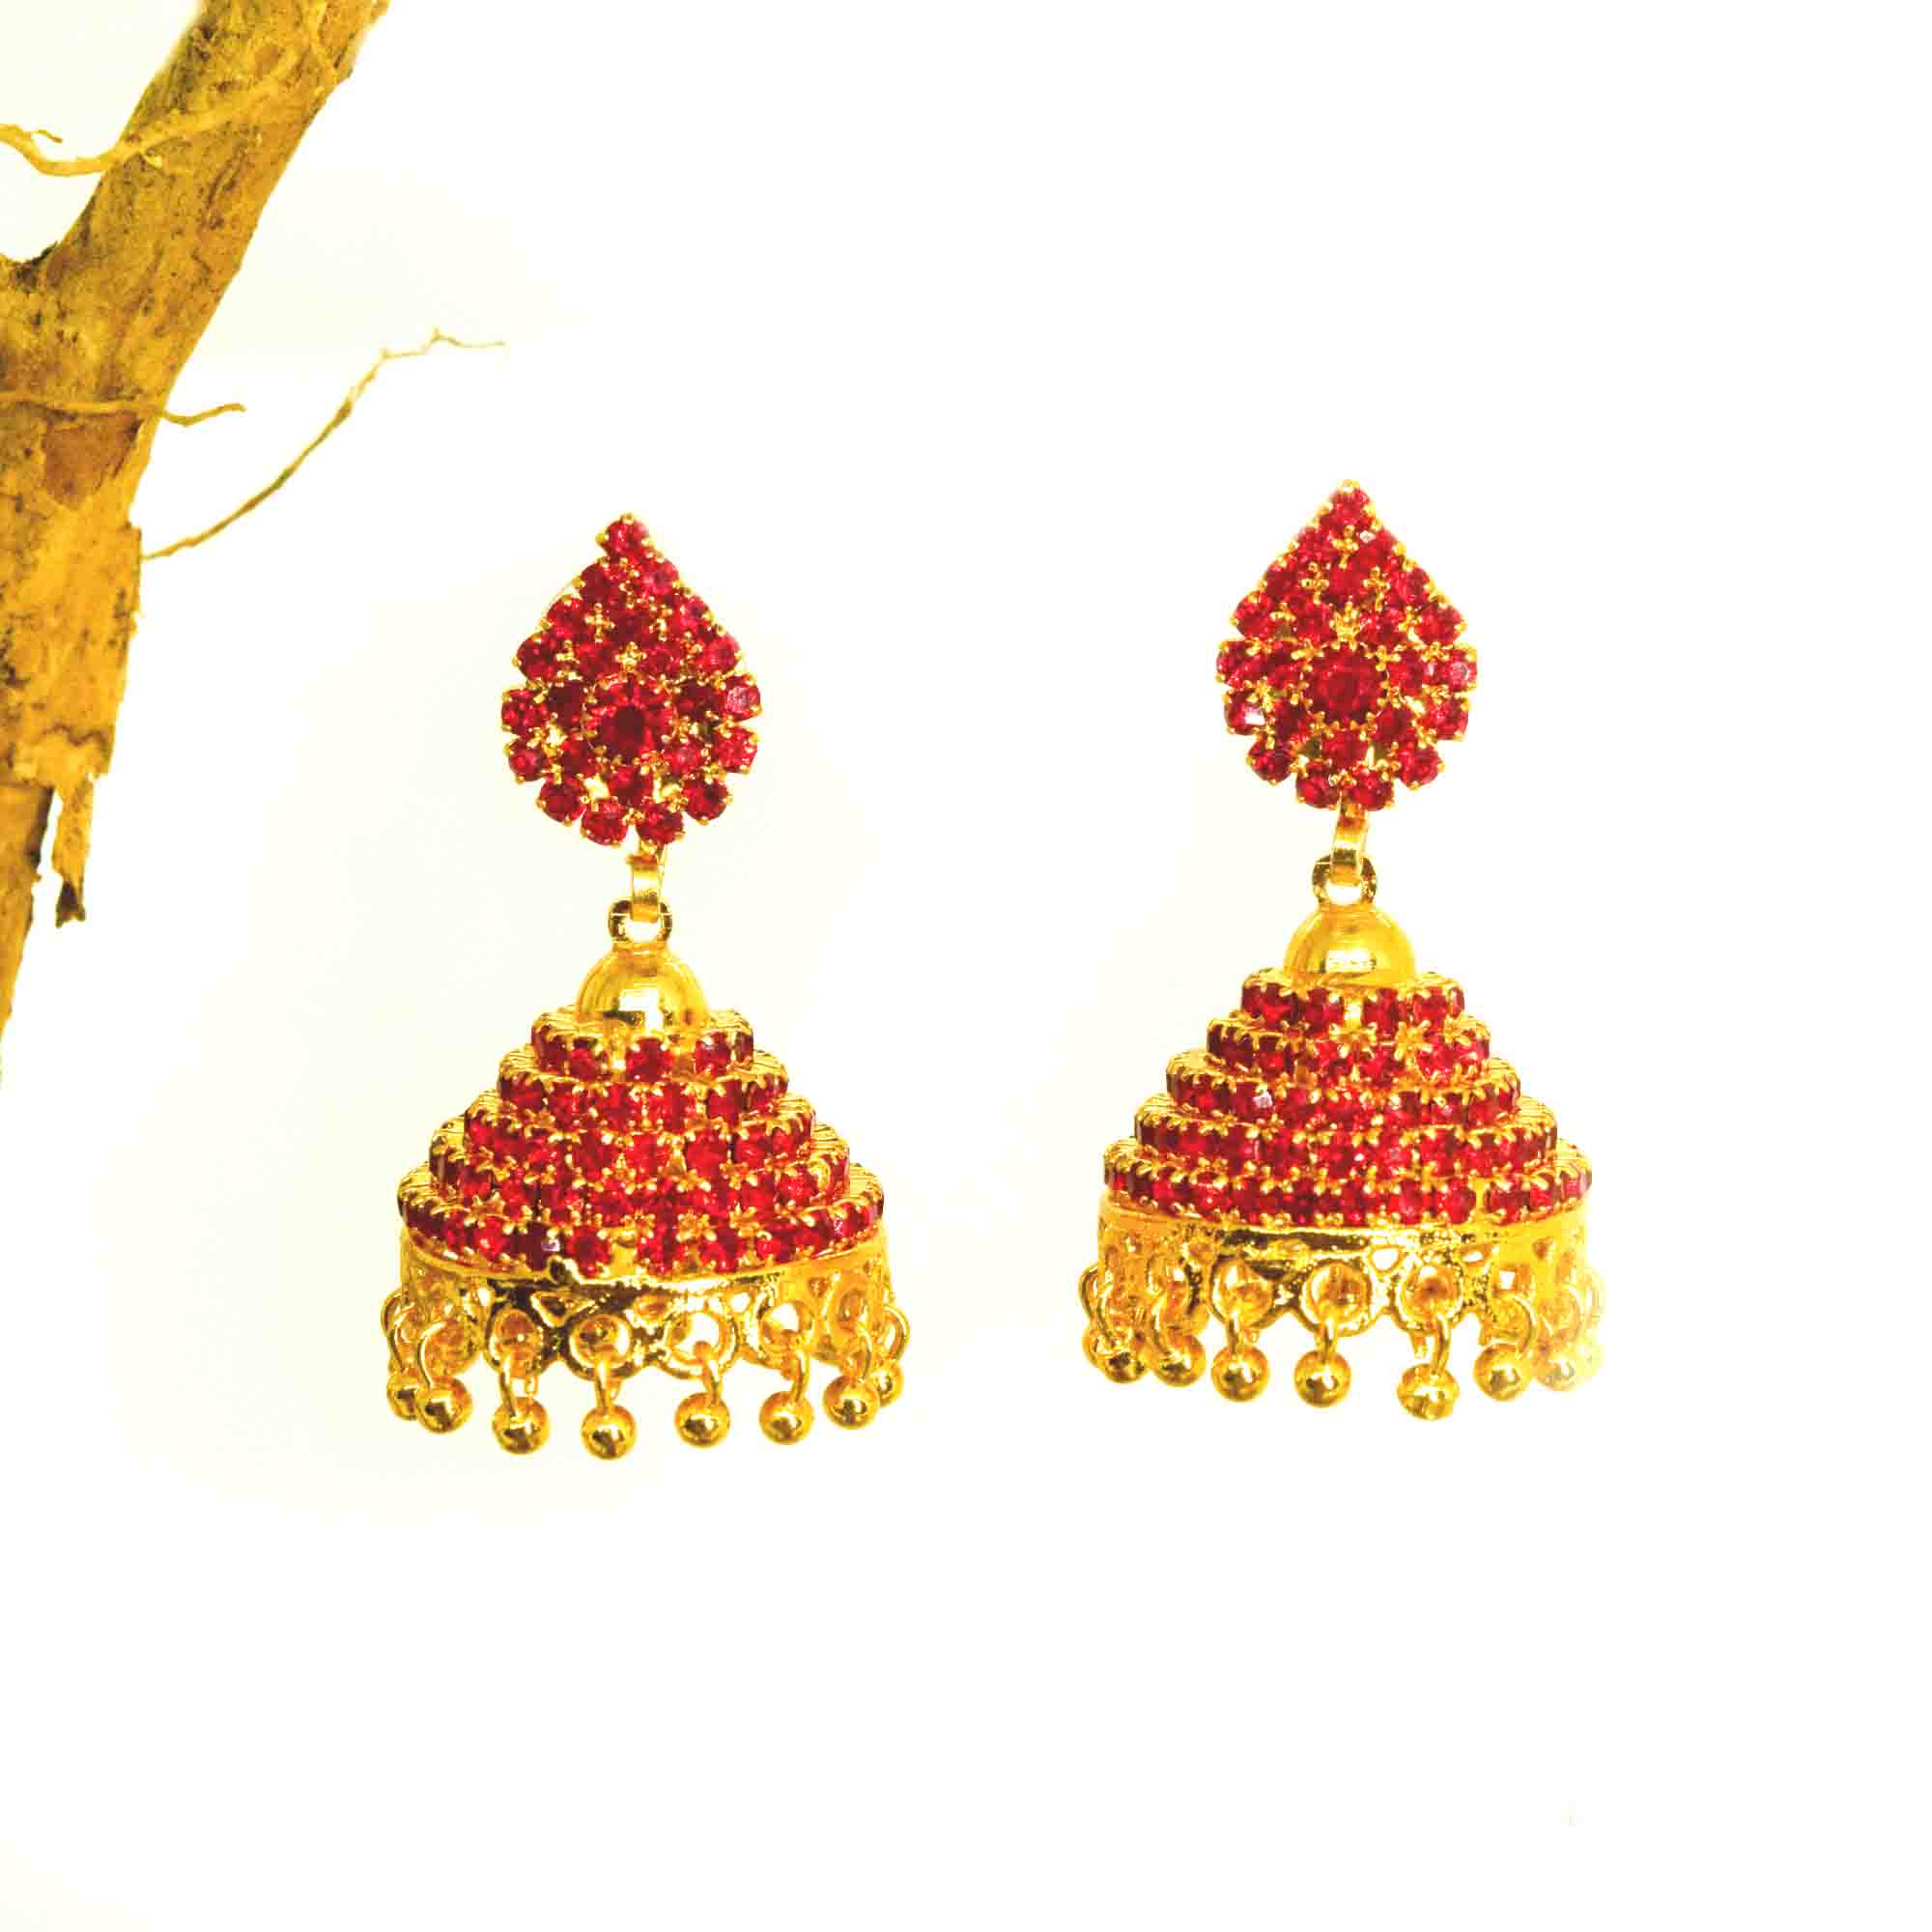 Gold Plated Jimikki Earrings With Fixed Stone Drop earrings NowBuy.lk 4